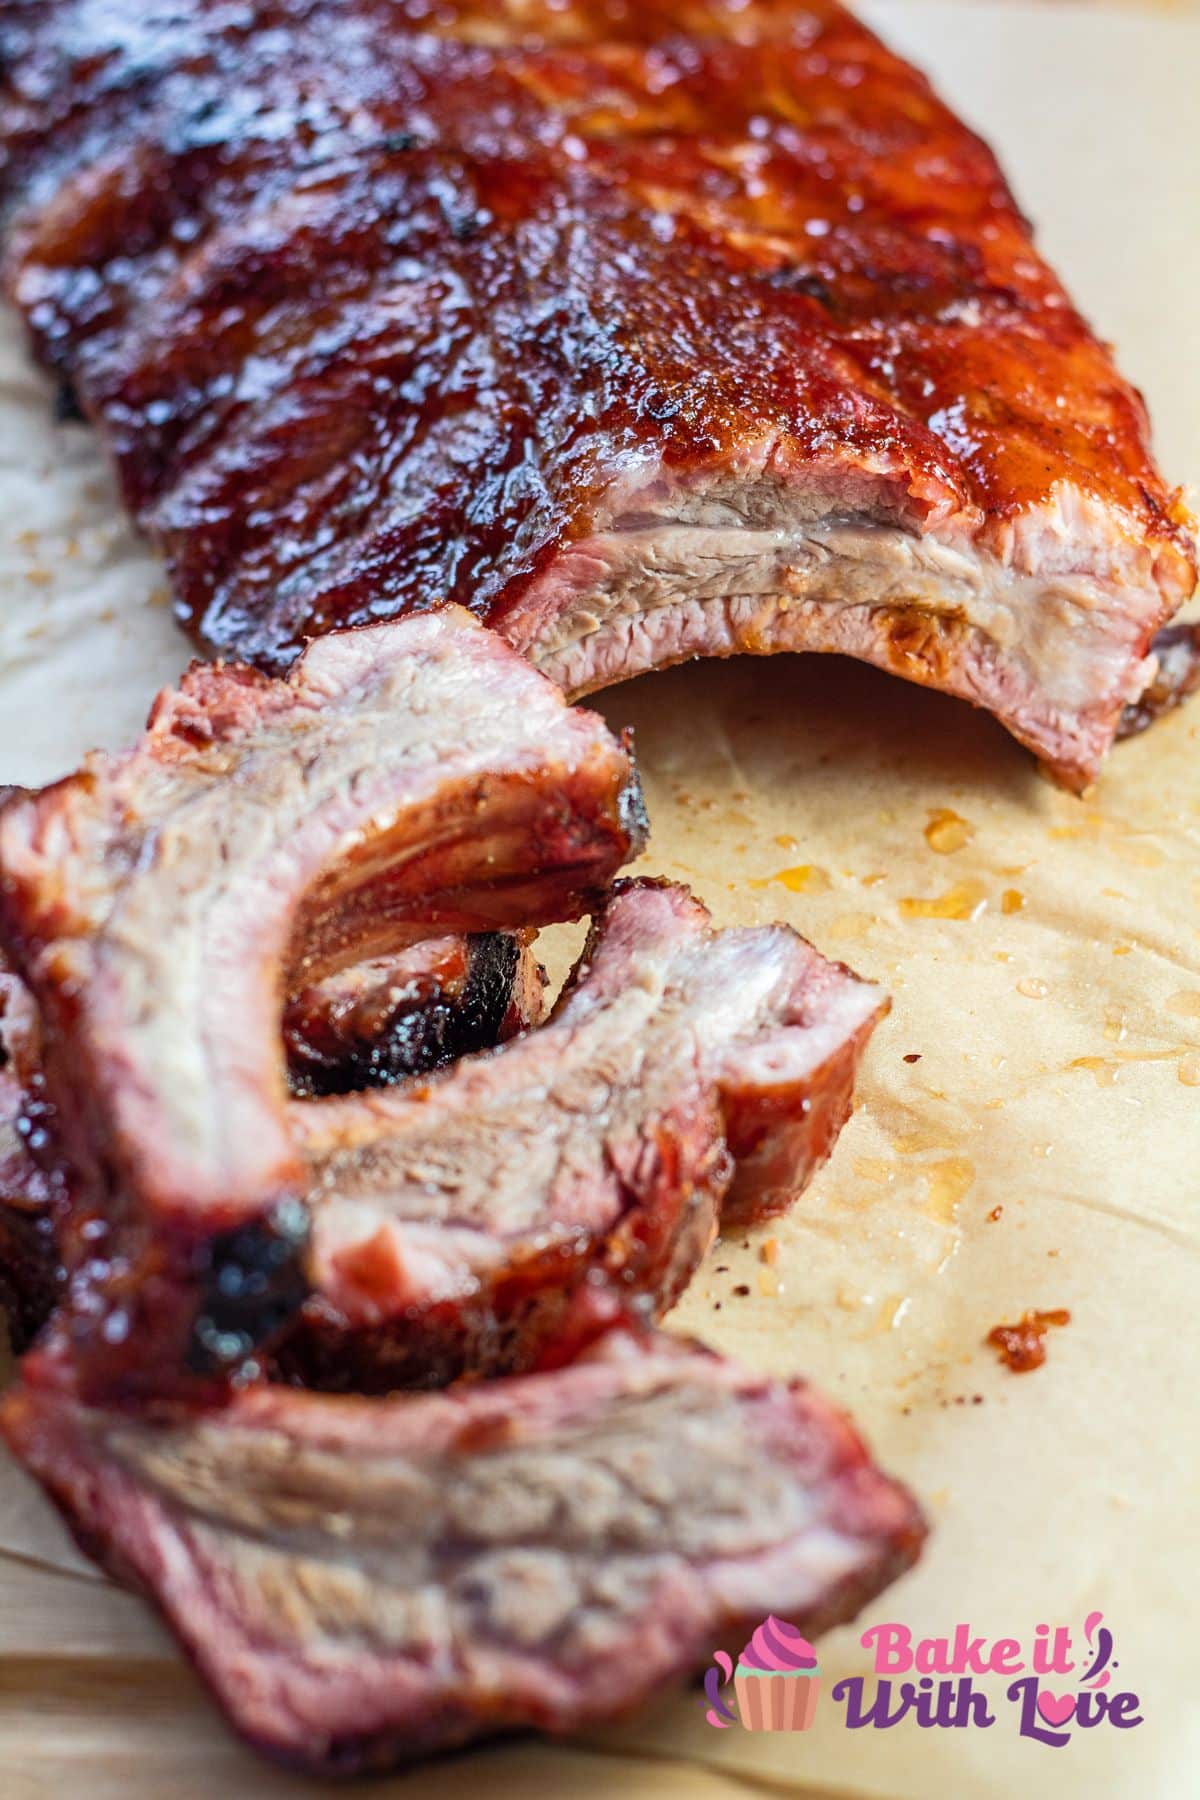 Tall closeup on the sliced smoked baby back ribs on cutting board.